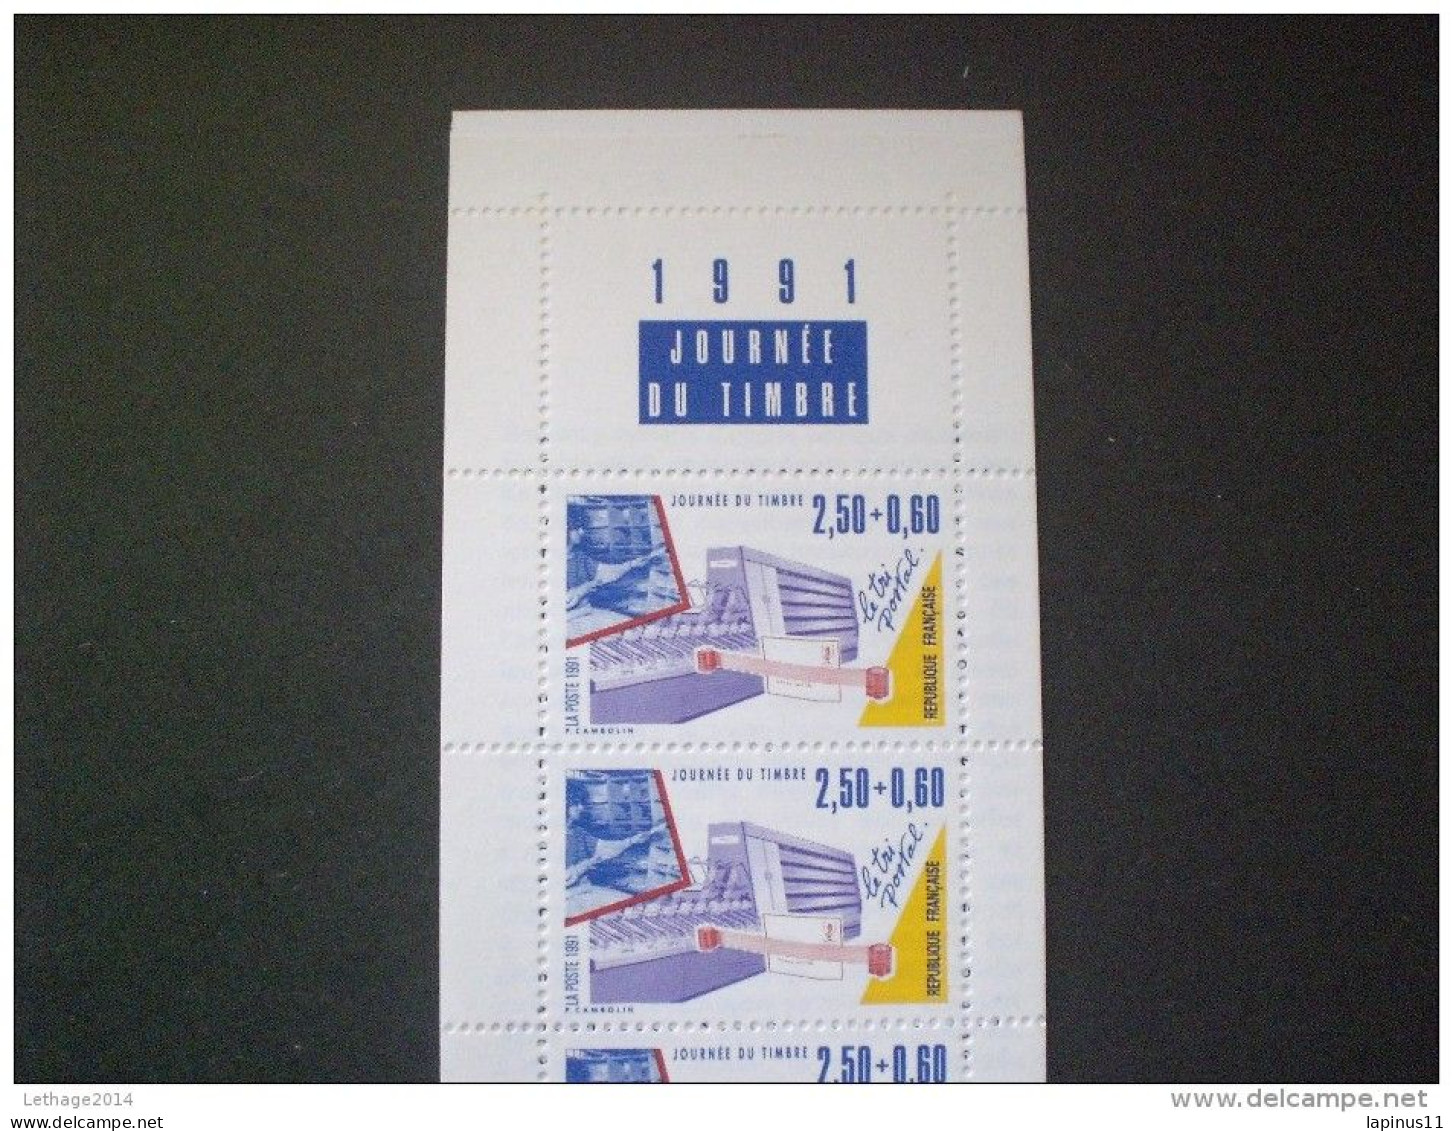 STAMPS FRANCE CARNETS 1991 The Day Of Stamps - Personen